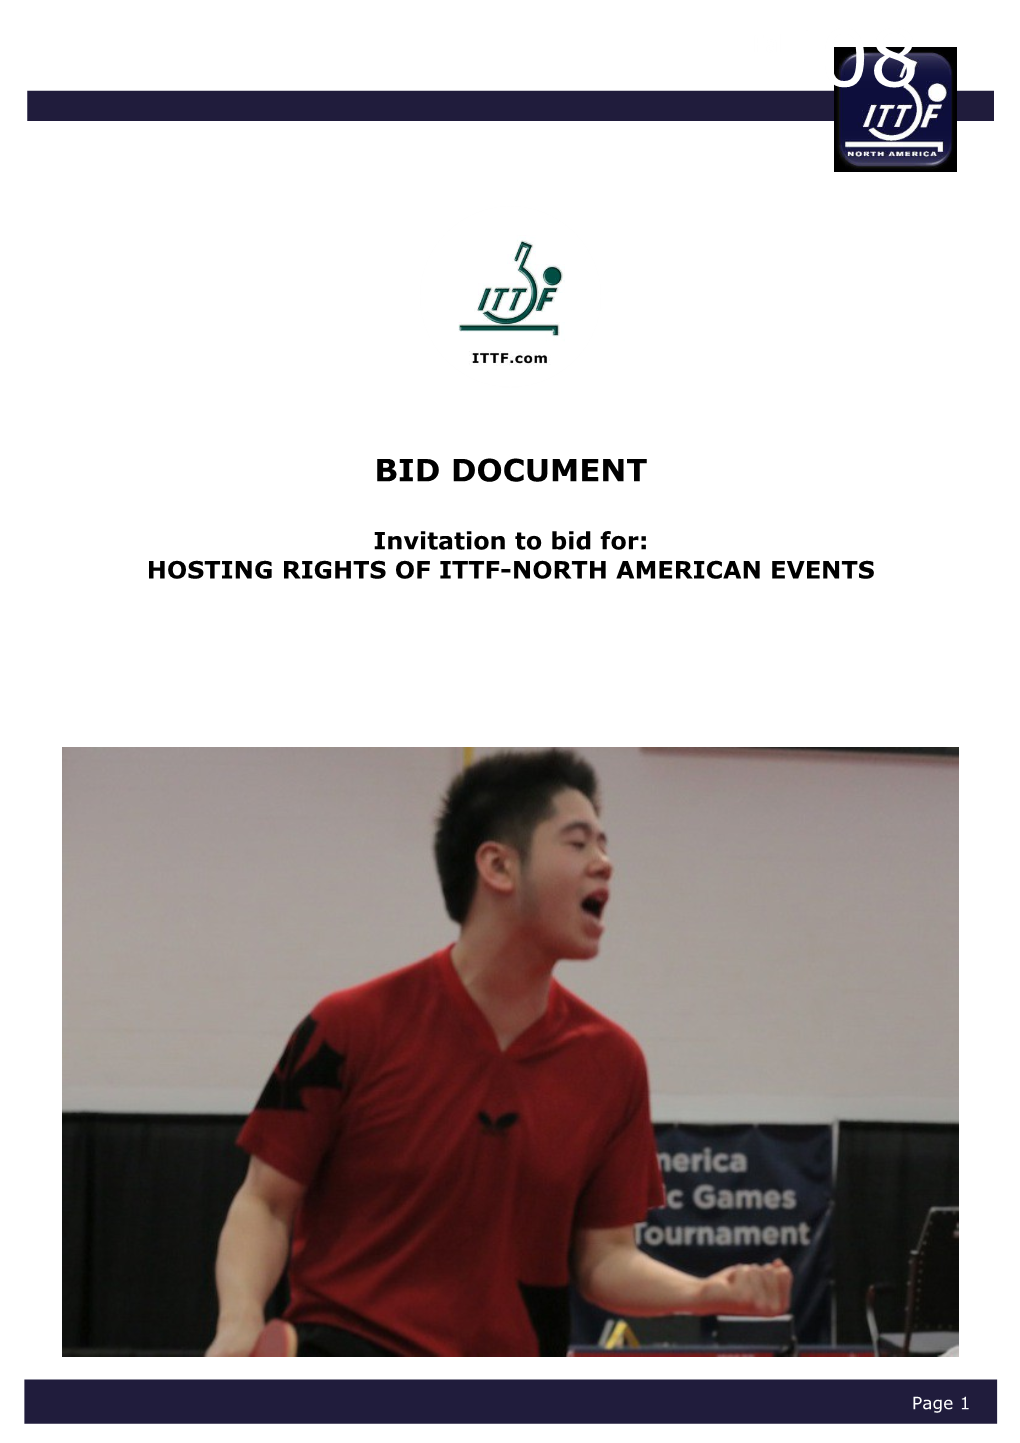 Hosting Rights of Ittf-North American Events